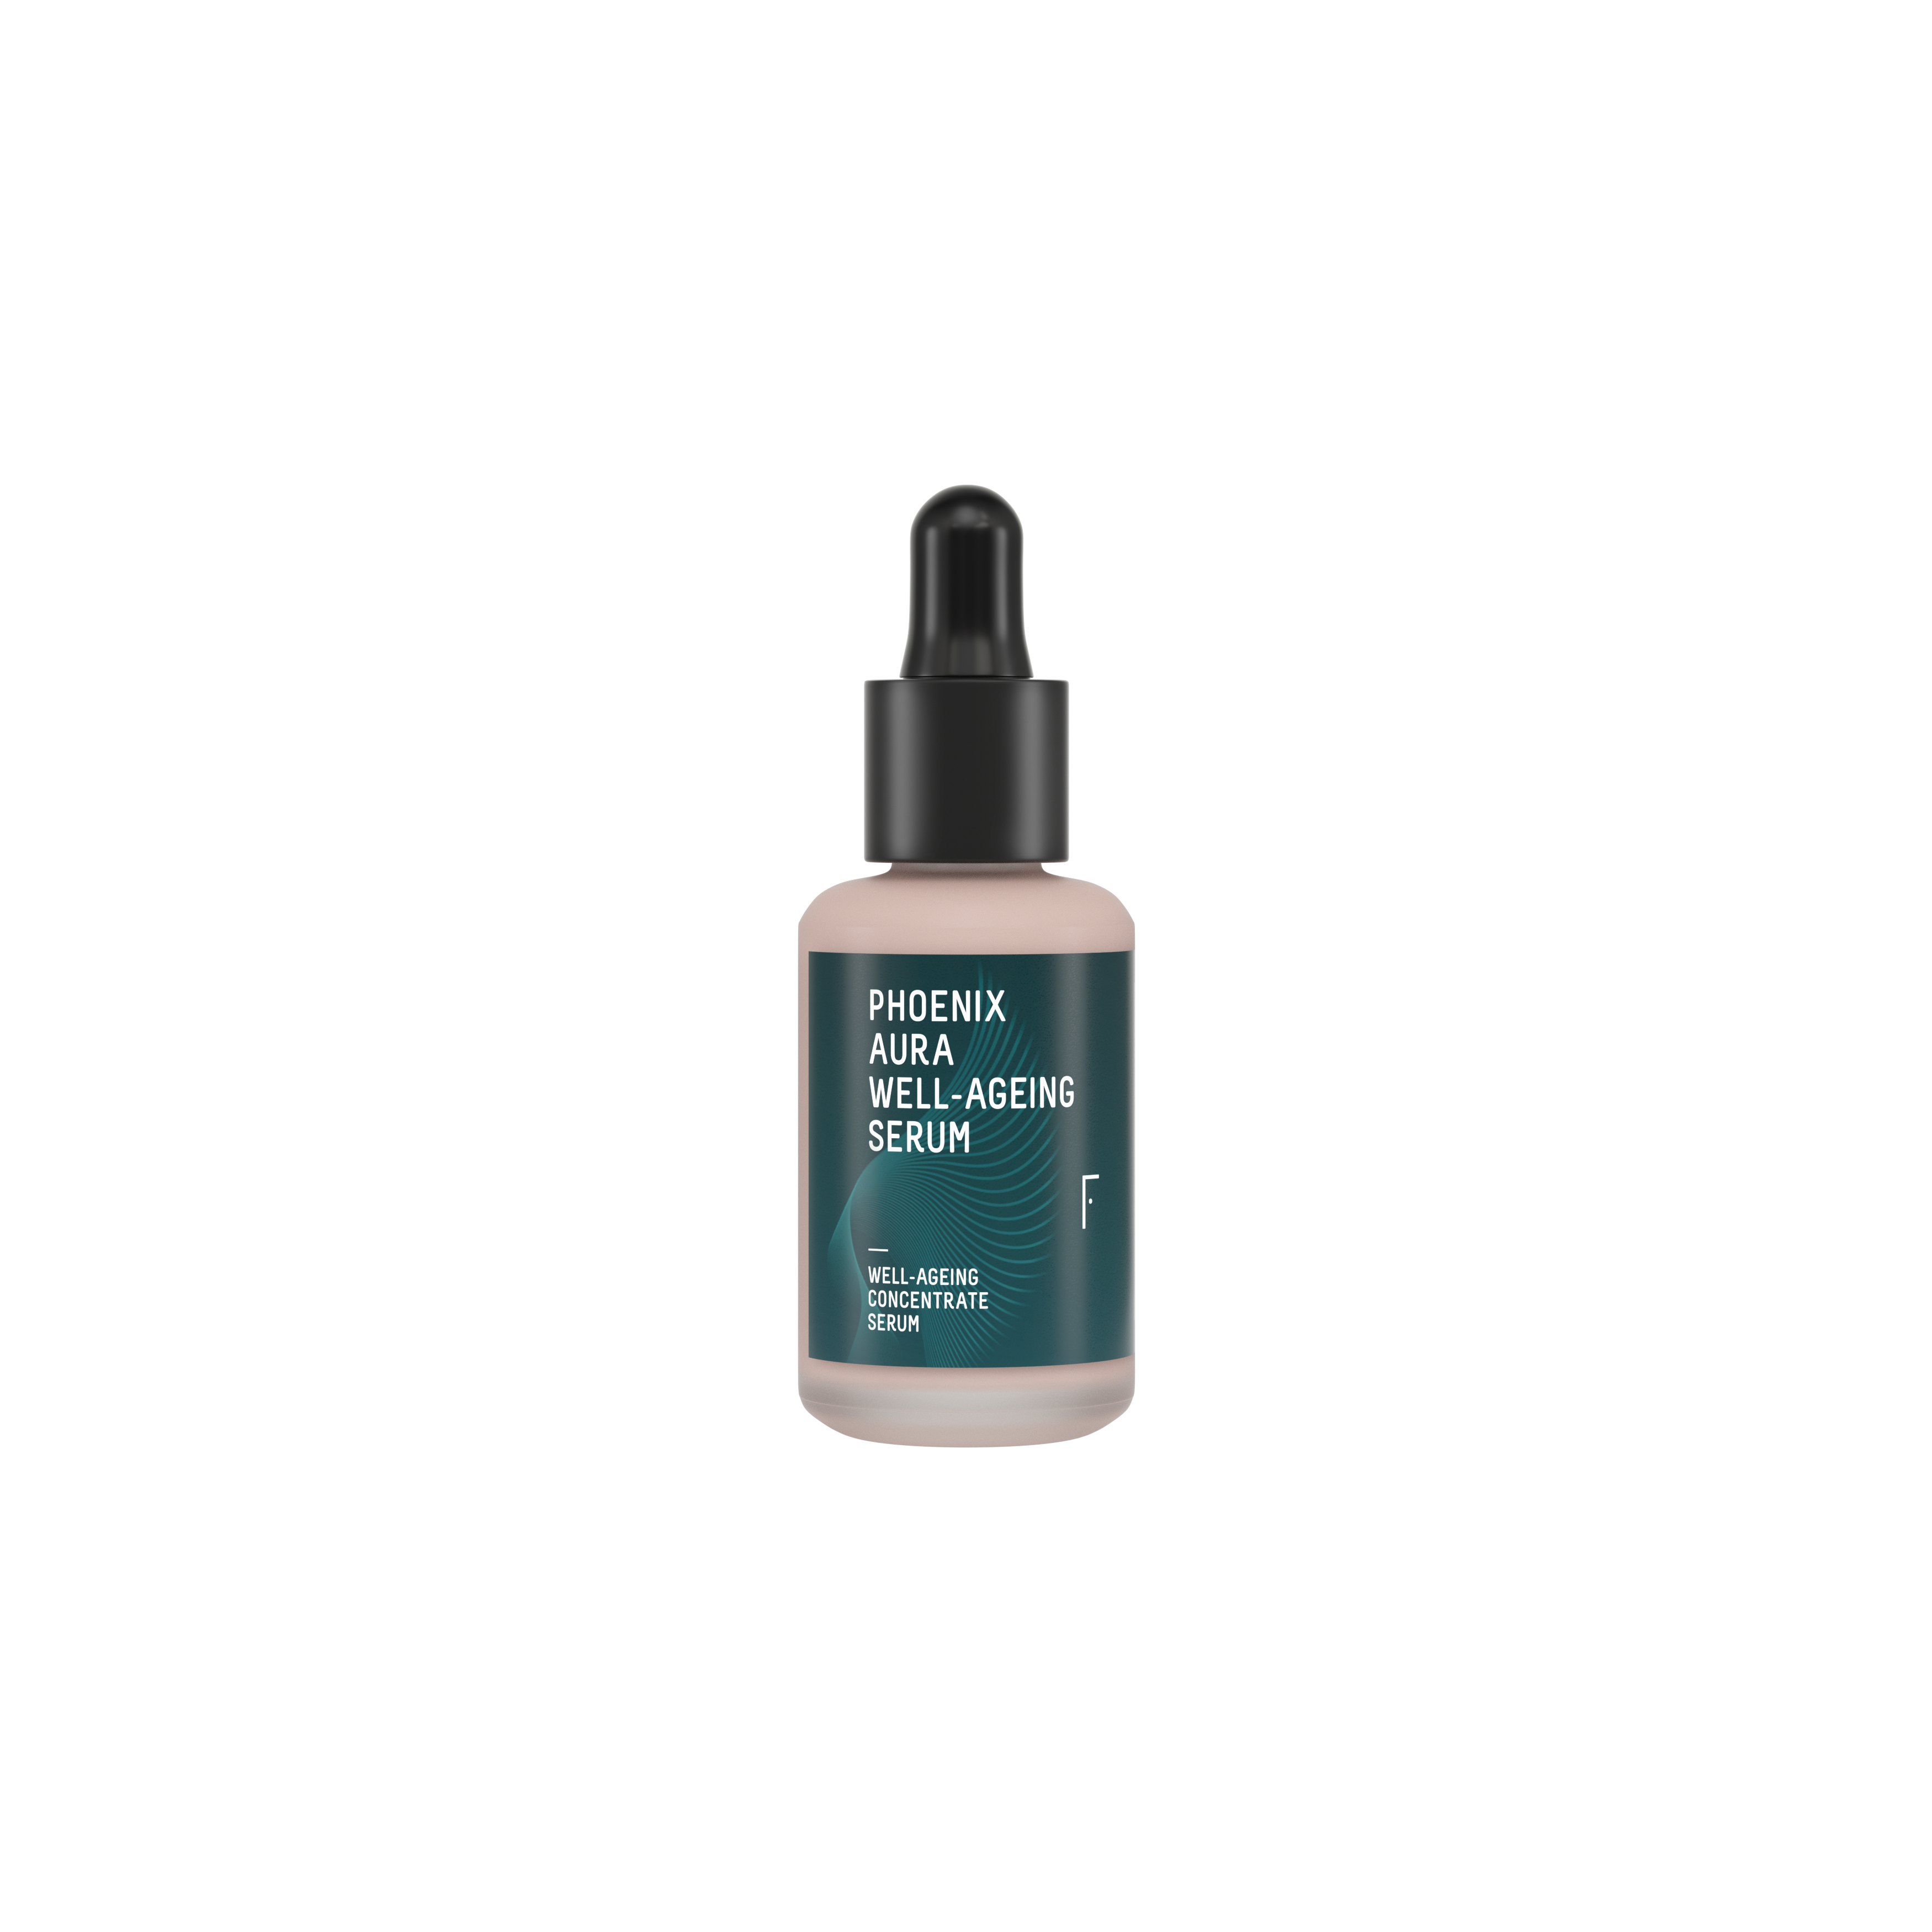 Illuminating Firmness Serum, by MilaBonis (€53).  Activates cell regeneration and corrects skin texture.